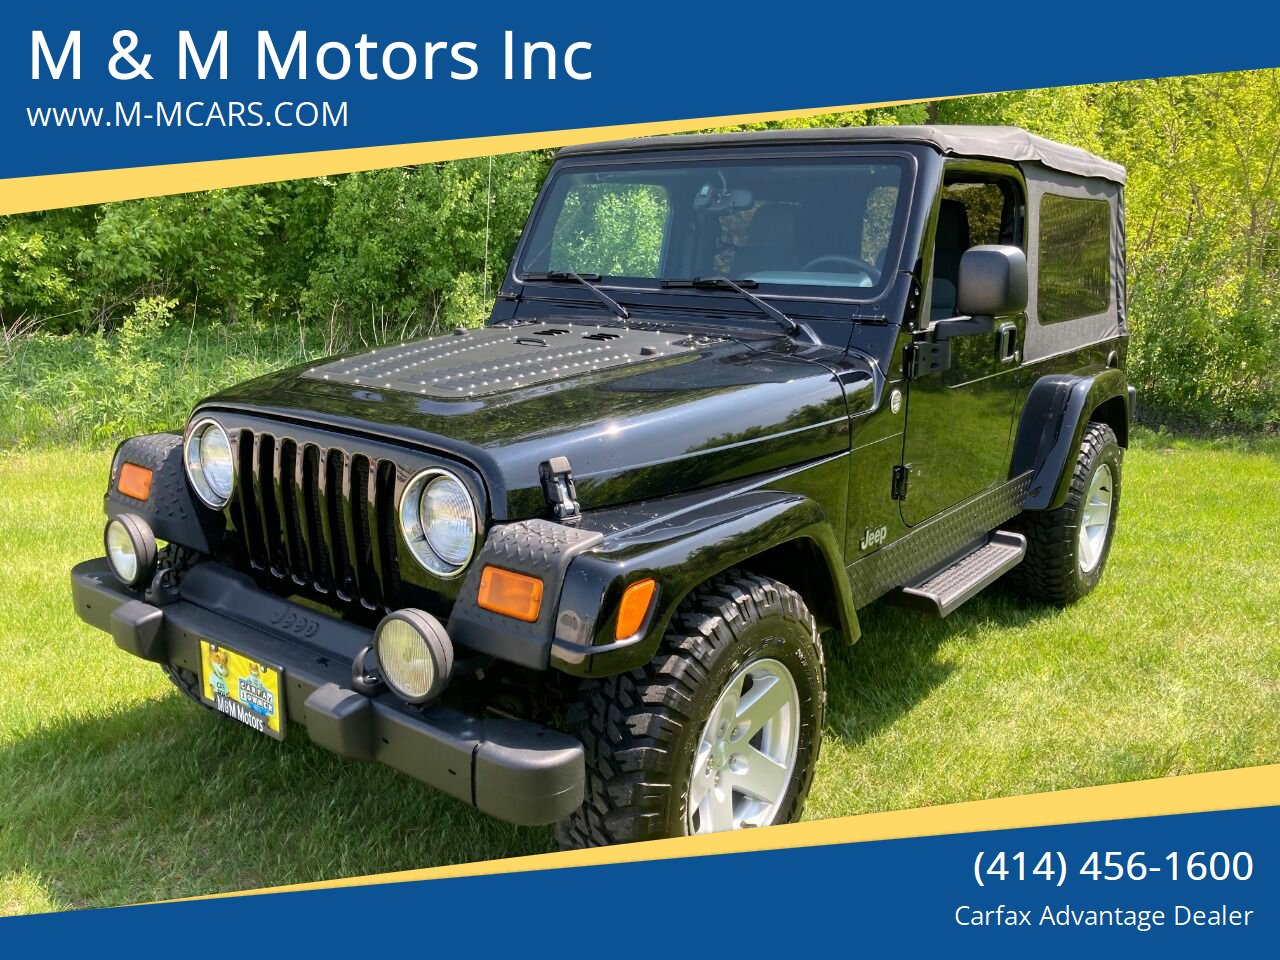 2000 to 2005 Jeep Wrangler For Sale from $499 to $4,850,000